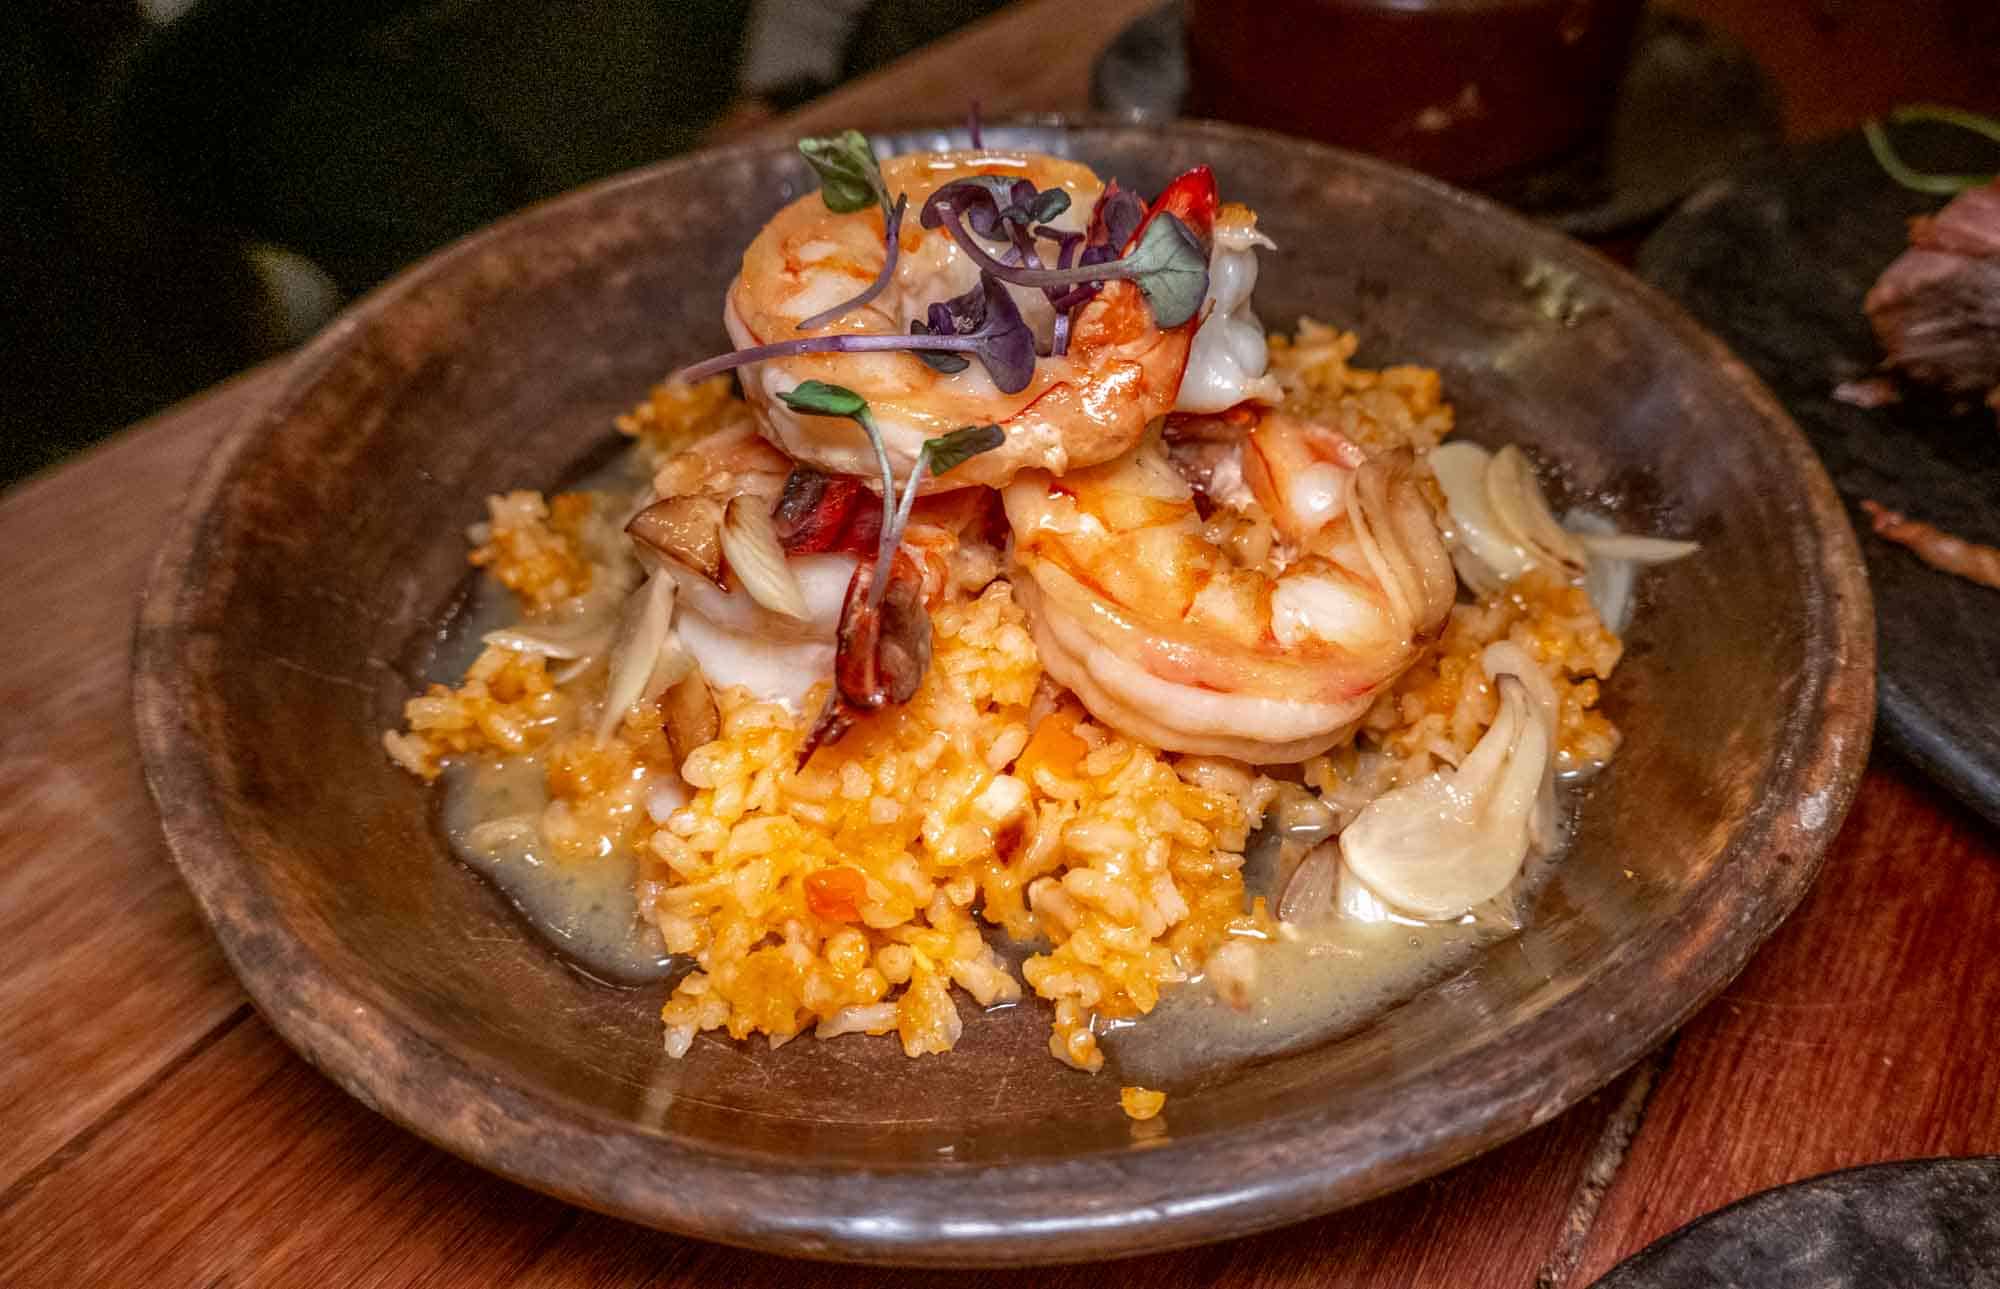 Shrimp, garlic and chilis over rice in a wood bowl at Sor Ynez